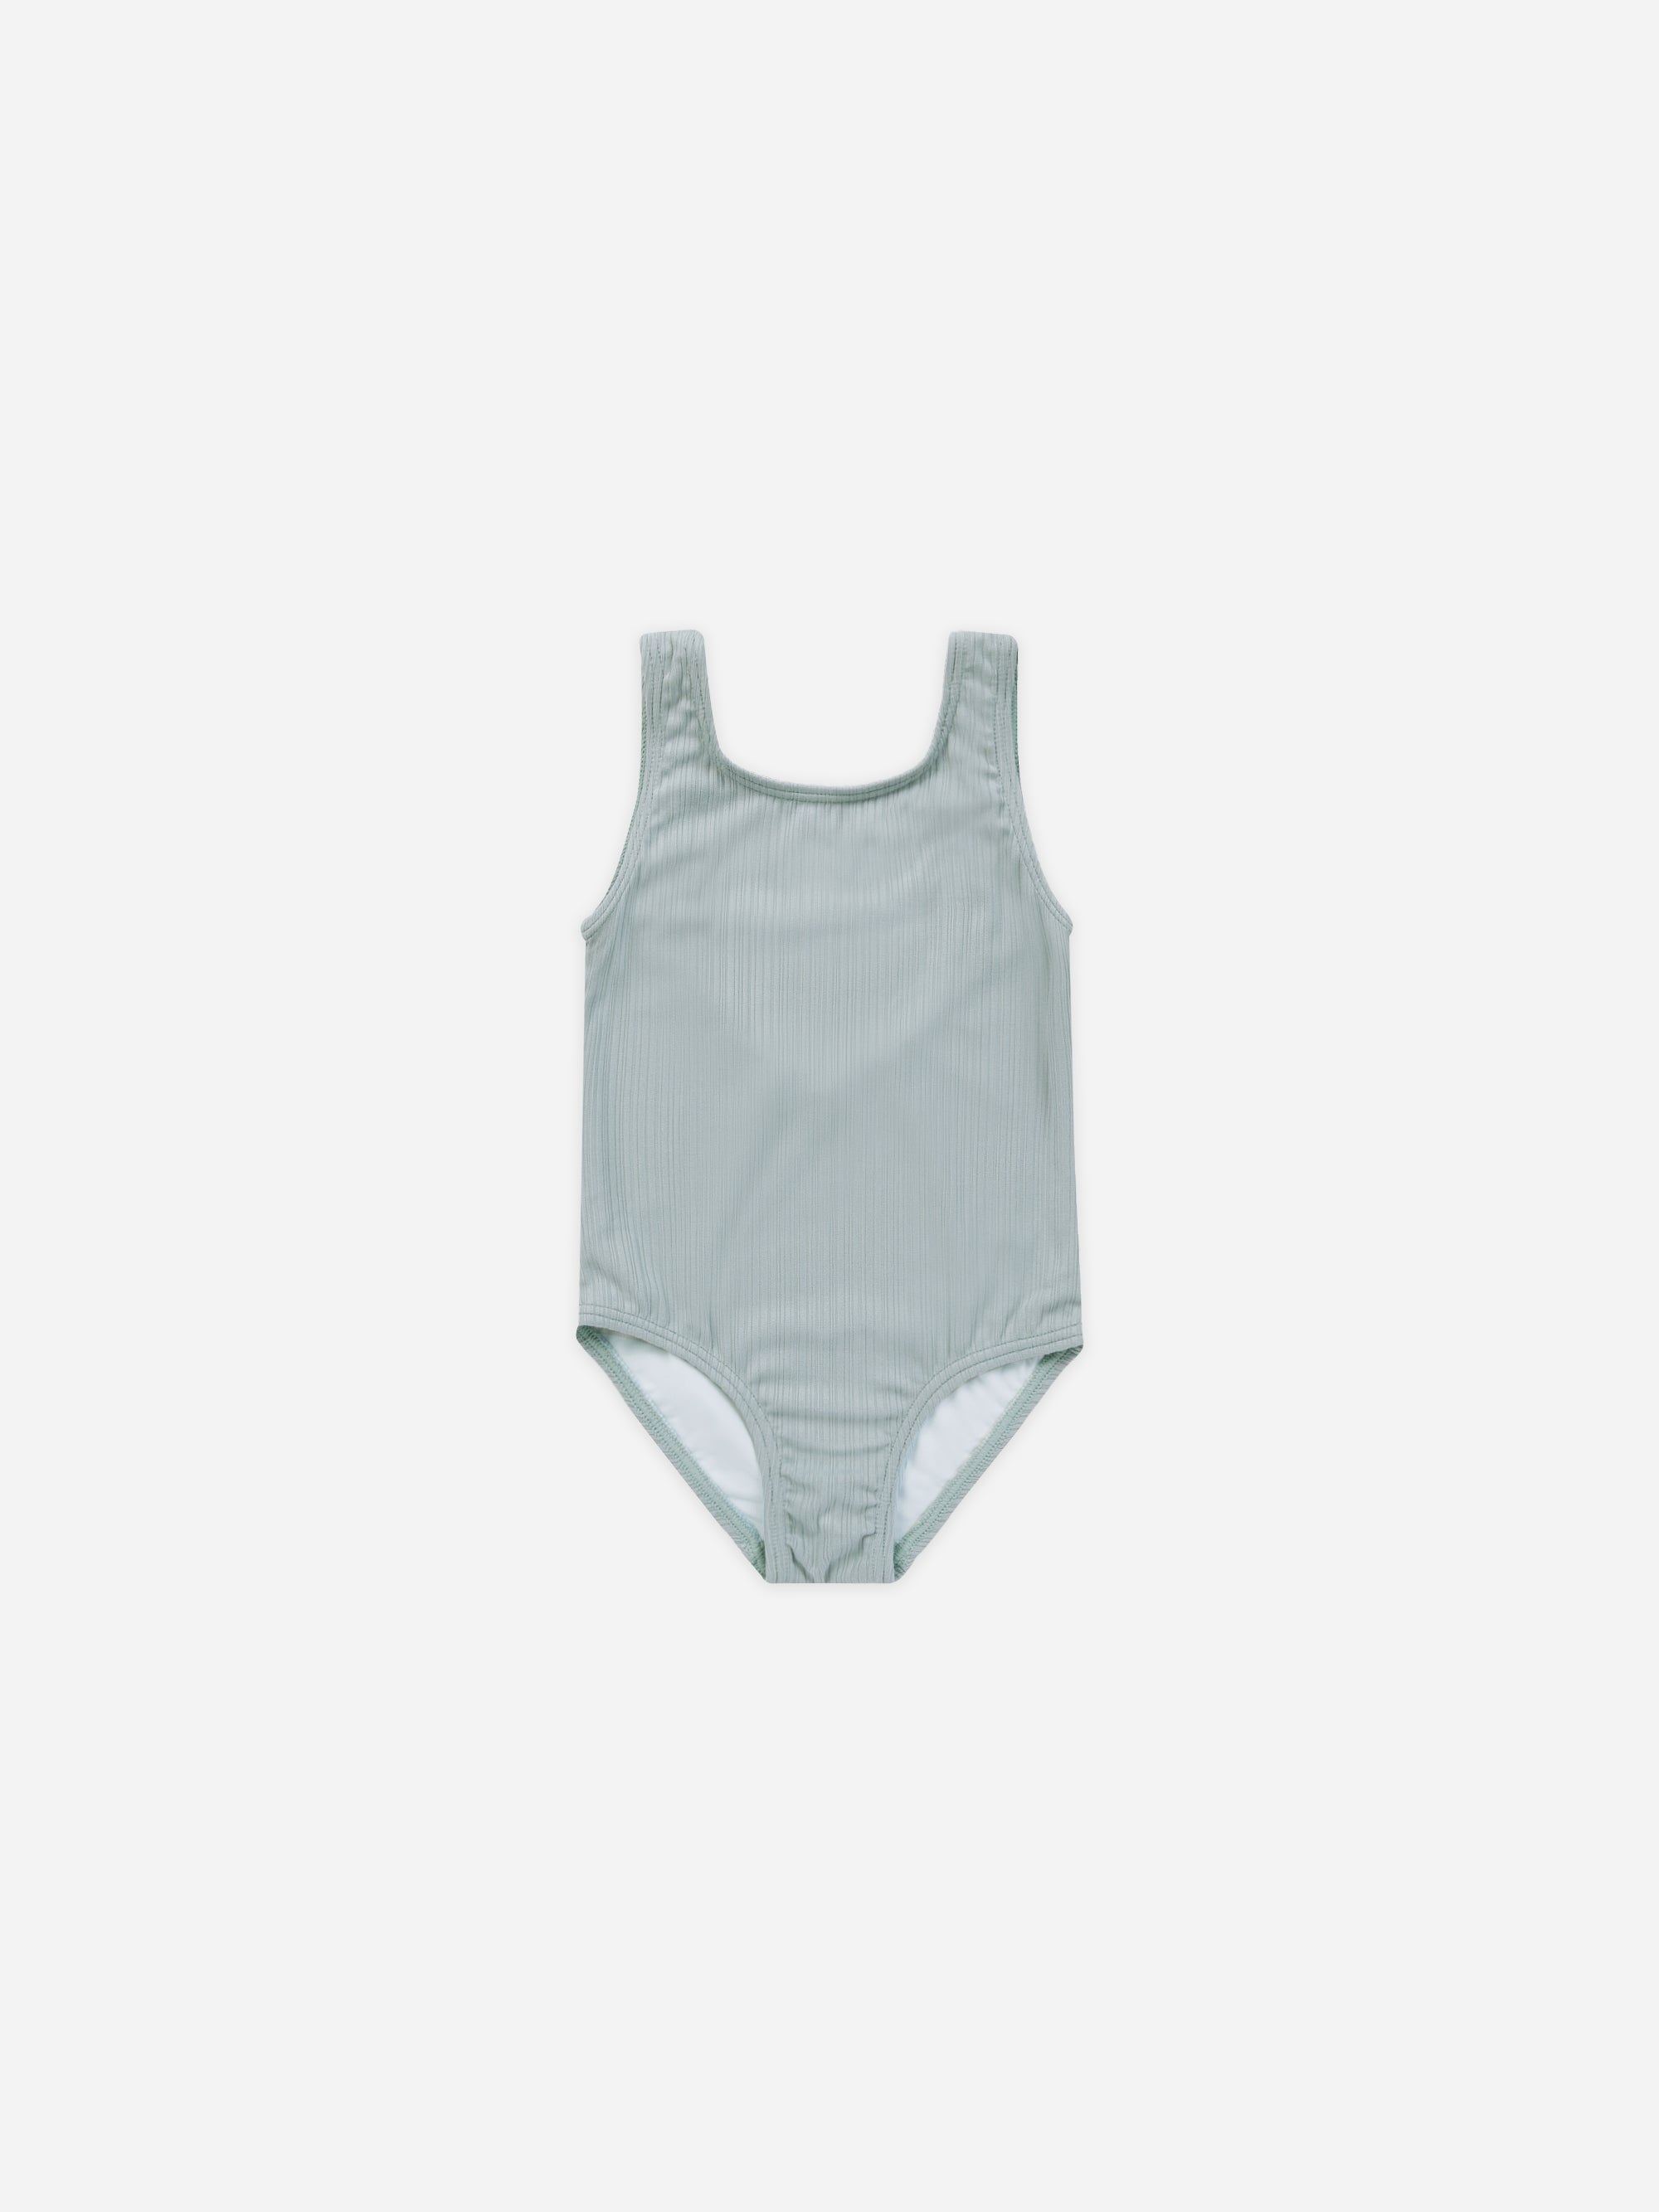 Moxie One-Piece || Blue - Rylee + Cru | Kids Clothes | Trendy Baby Clothes | Modern Infant Outfits |